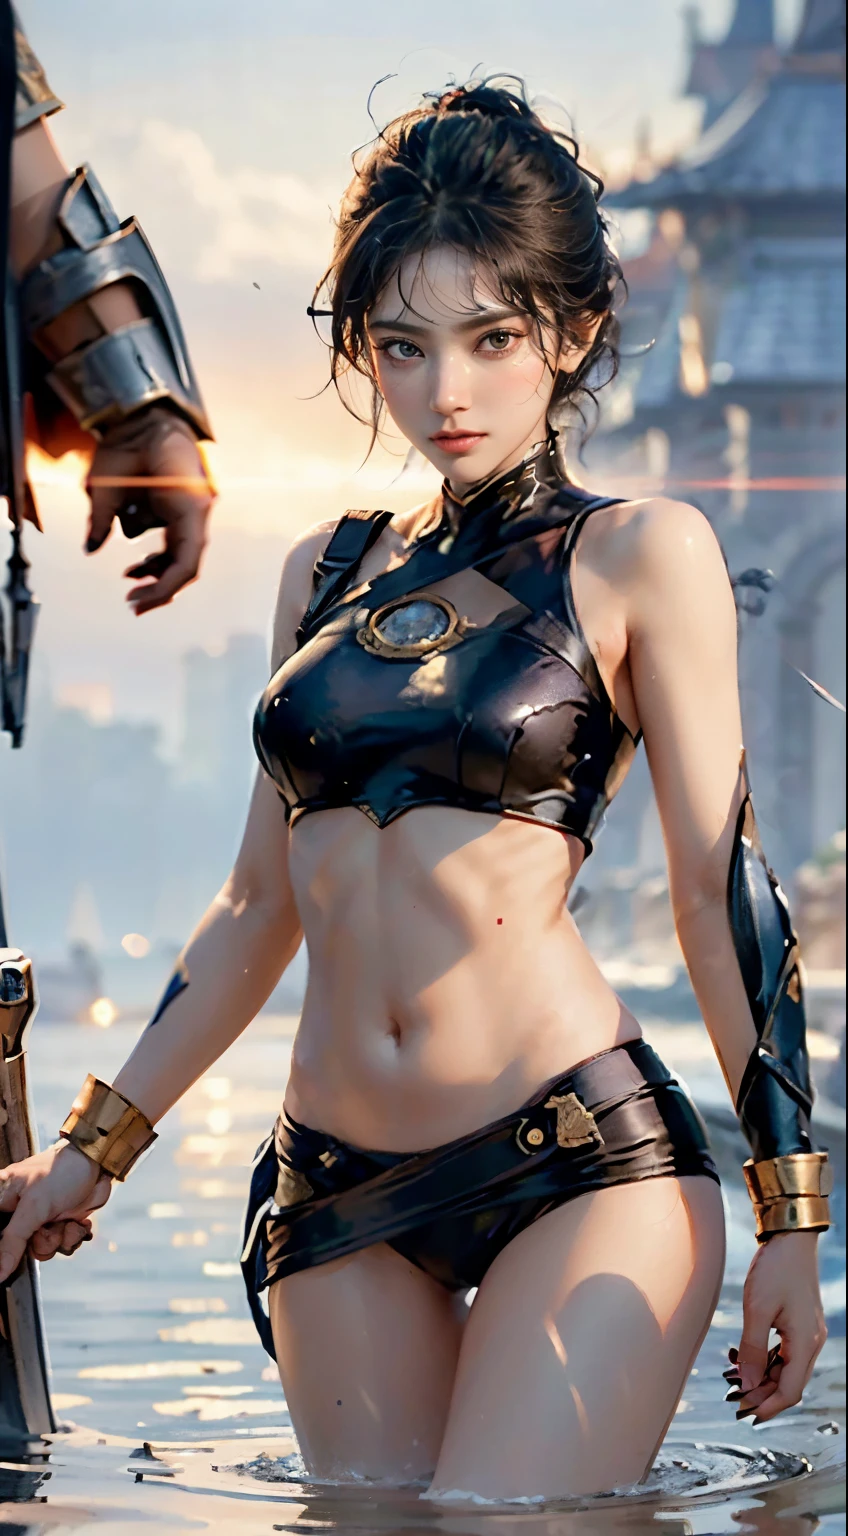 (The FW), 1womanl, Solo, 24 year old, 7headed body, (cute  face), (Ideal ratio body proportions), long , Fantasia, Magic Effects, (((A warrior))), , heavy wind, The costume sheer, Wet, short-hair, Dark hair, , A slender, Small buttocks, beauty legs, Skinny Legs, surrealism, Cinematic lighting, depth of fields, One-person viewpoint, F/1.8, 135 mm, nffsw, masterpiece, accurate, ((Anatomically correct)), Textured skin, Super Detail, high details, High quality, awardwinning, Best Quality, hight resolution, 8K